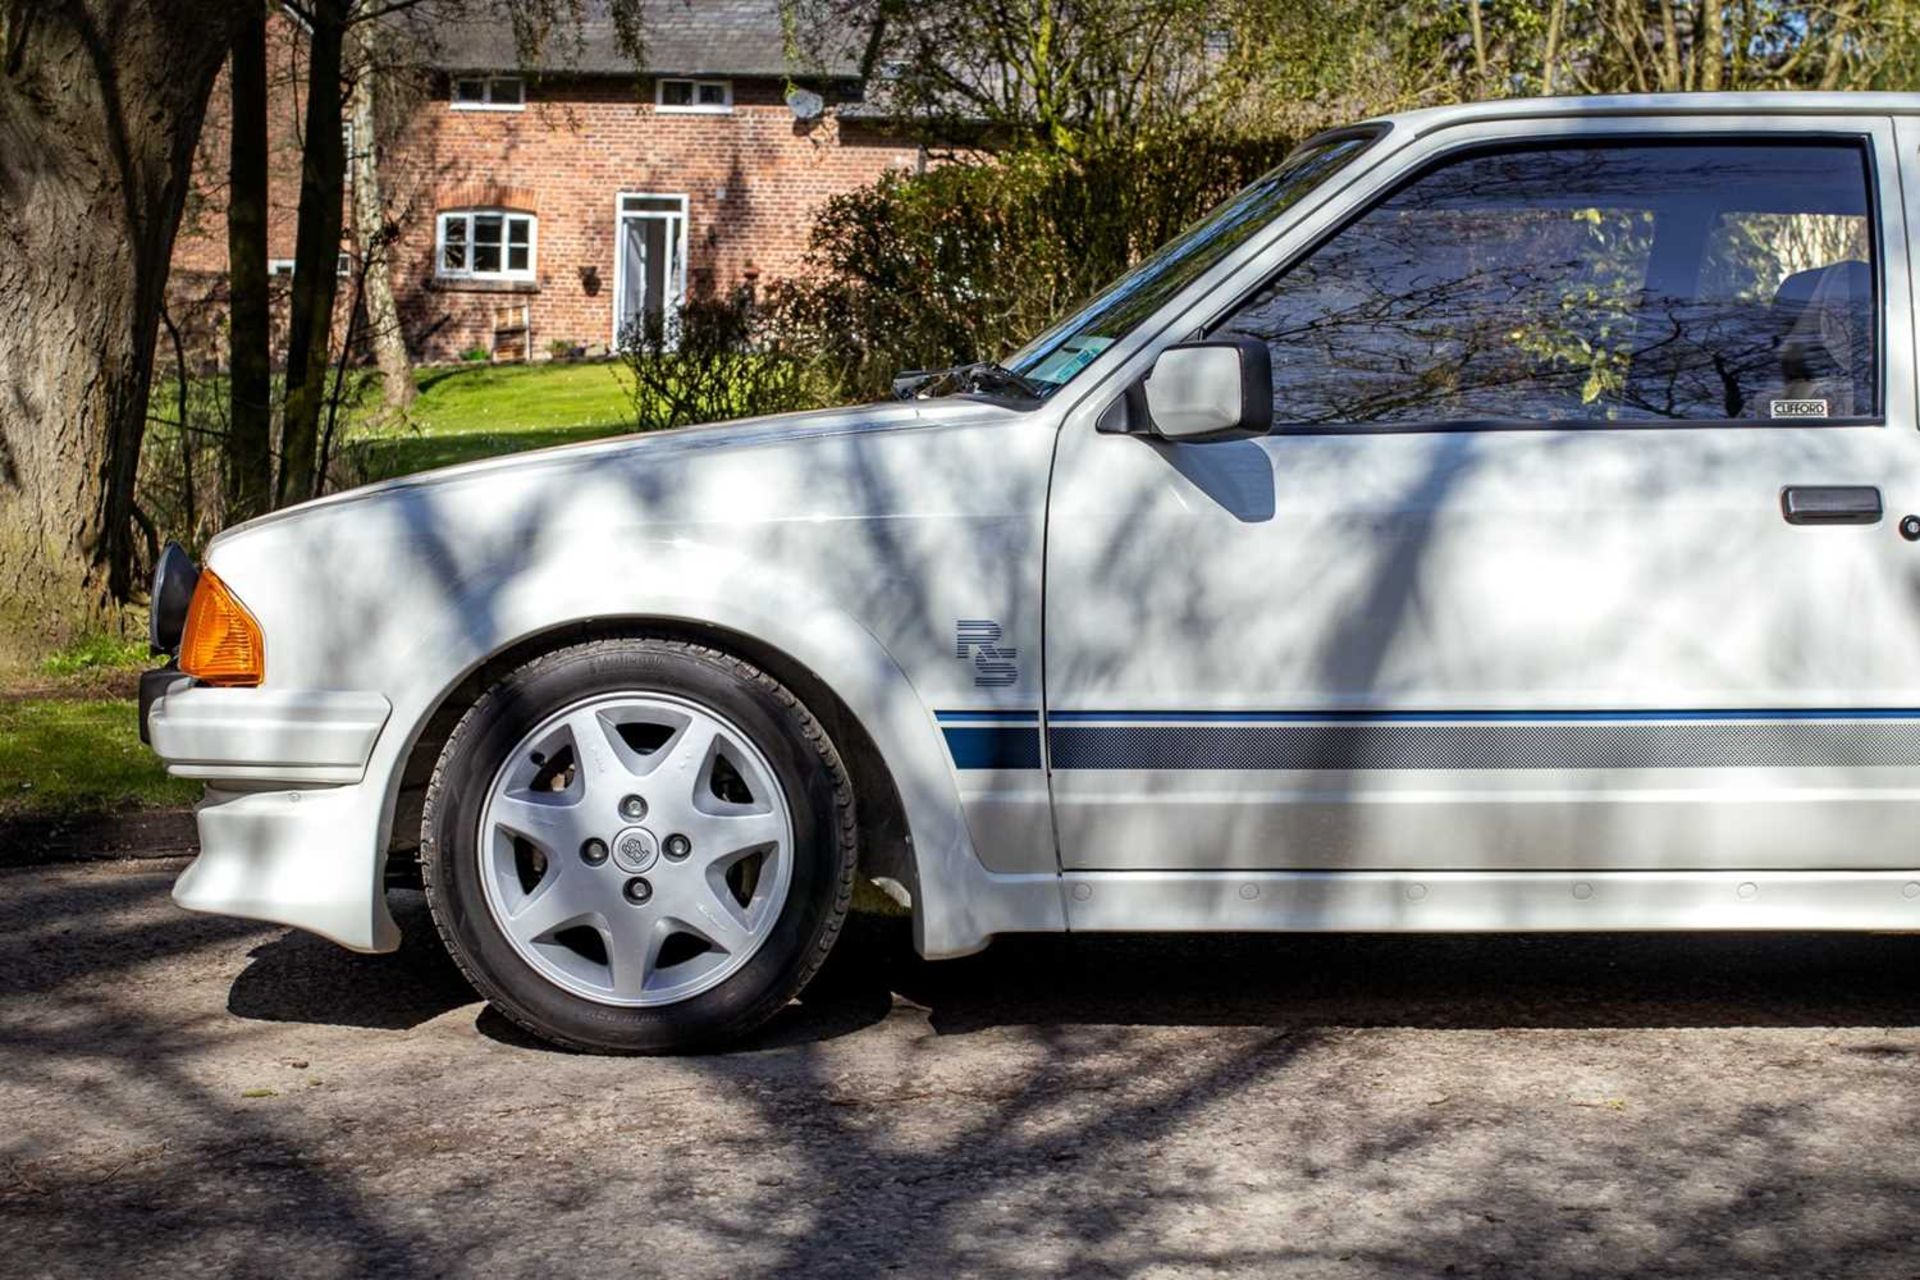 1985 Ford Escort RS Turbo S1 Subject to a full restoration  - Image 29 of 76